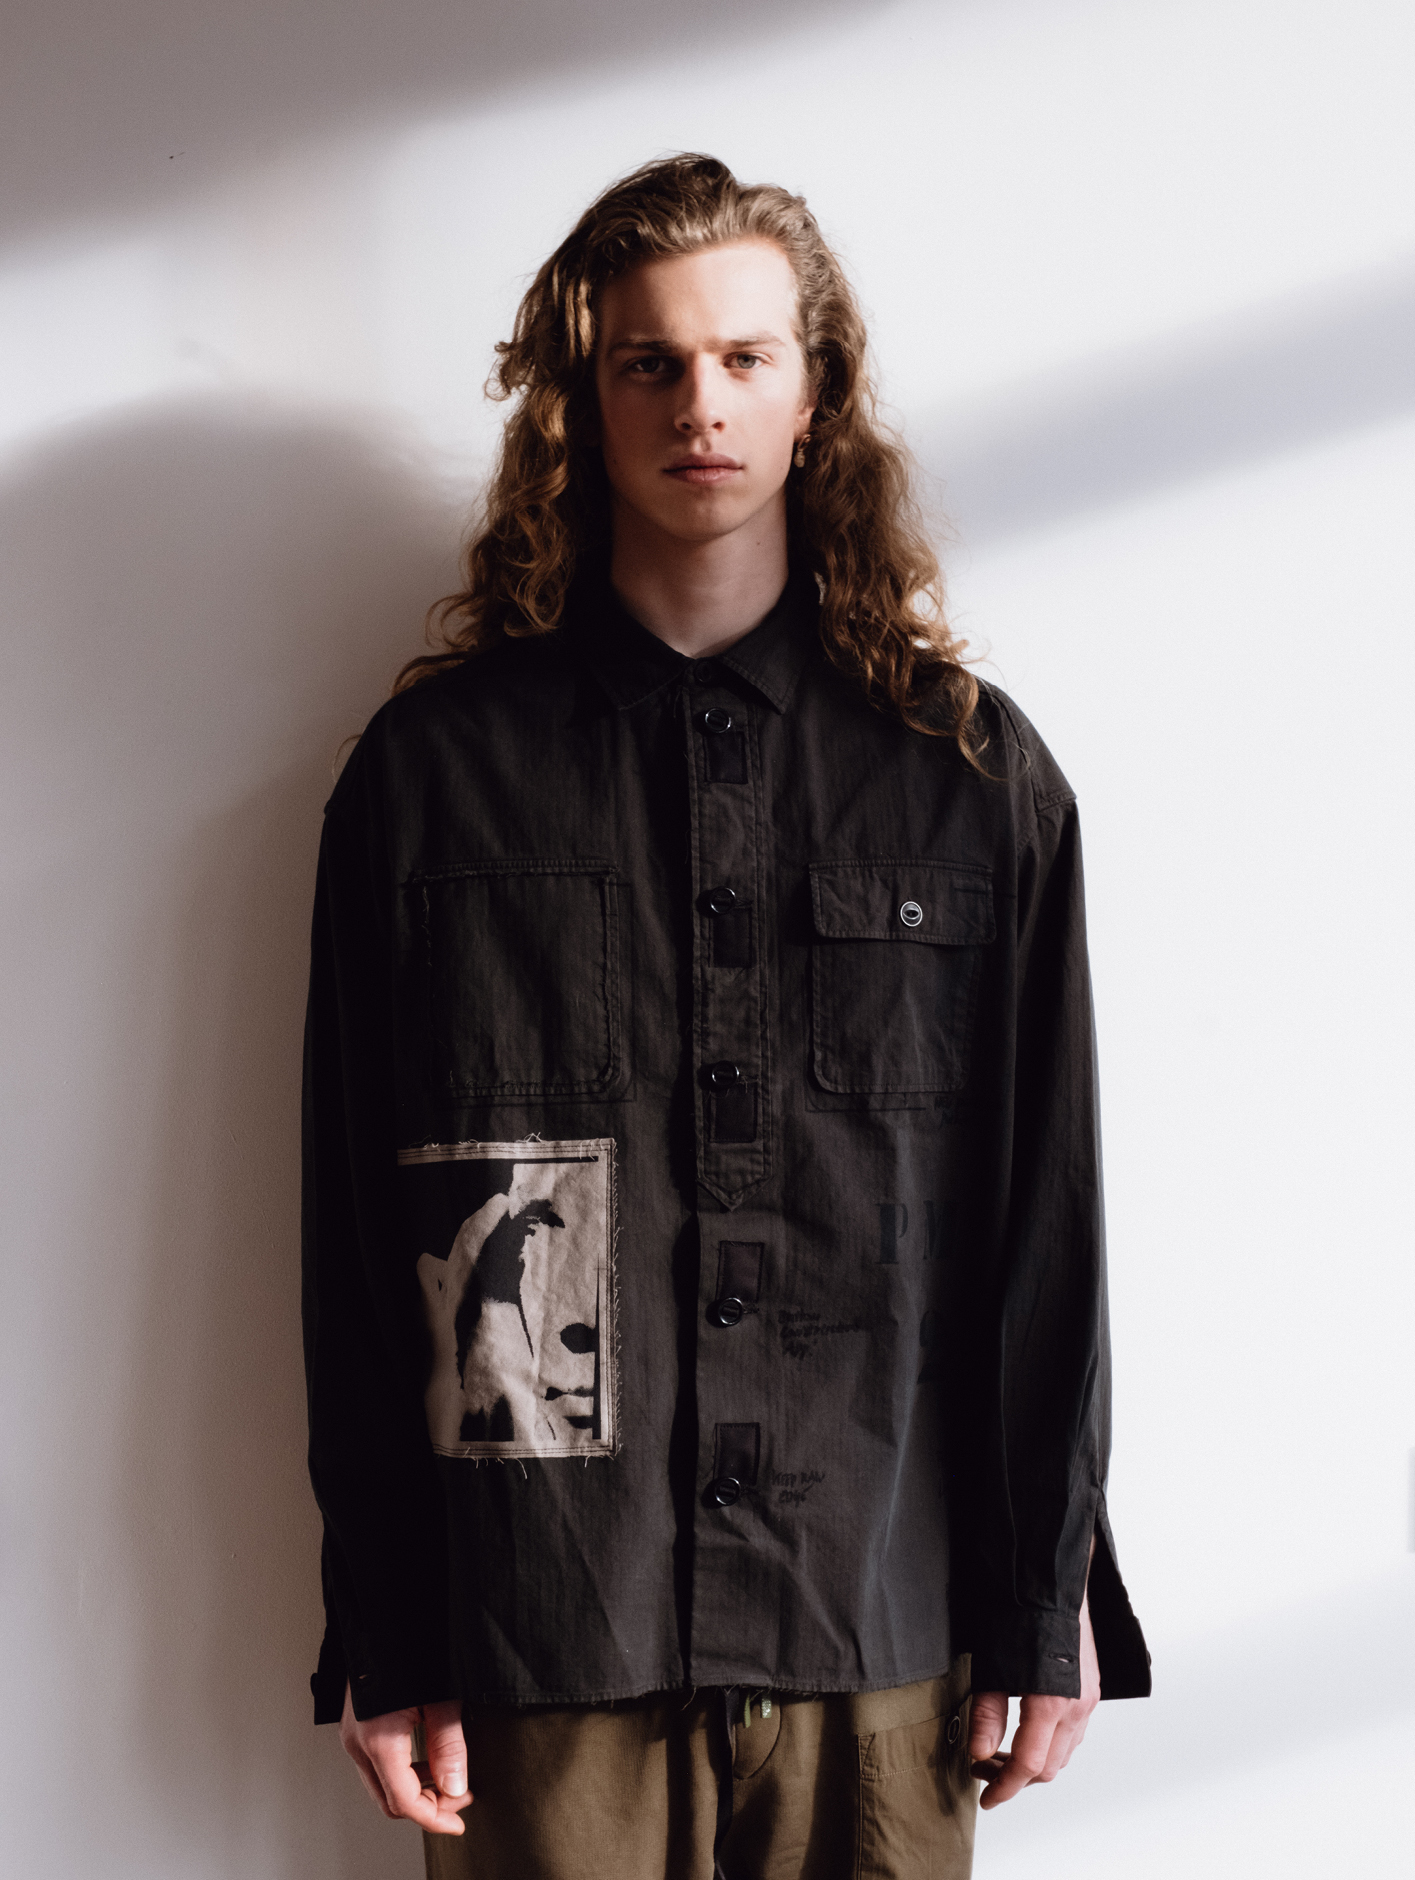 Applied Art Forms offers utilitarian garments with military detailing